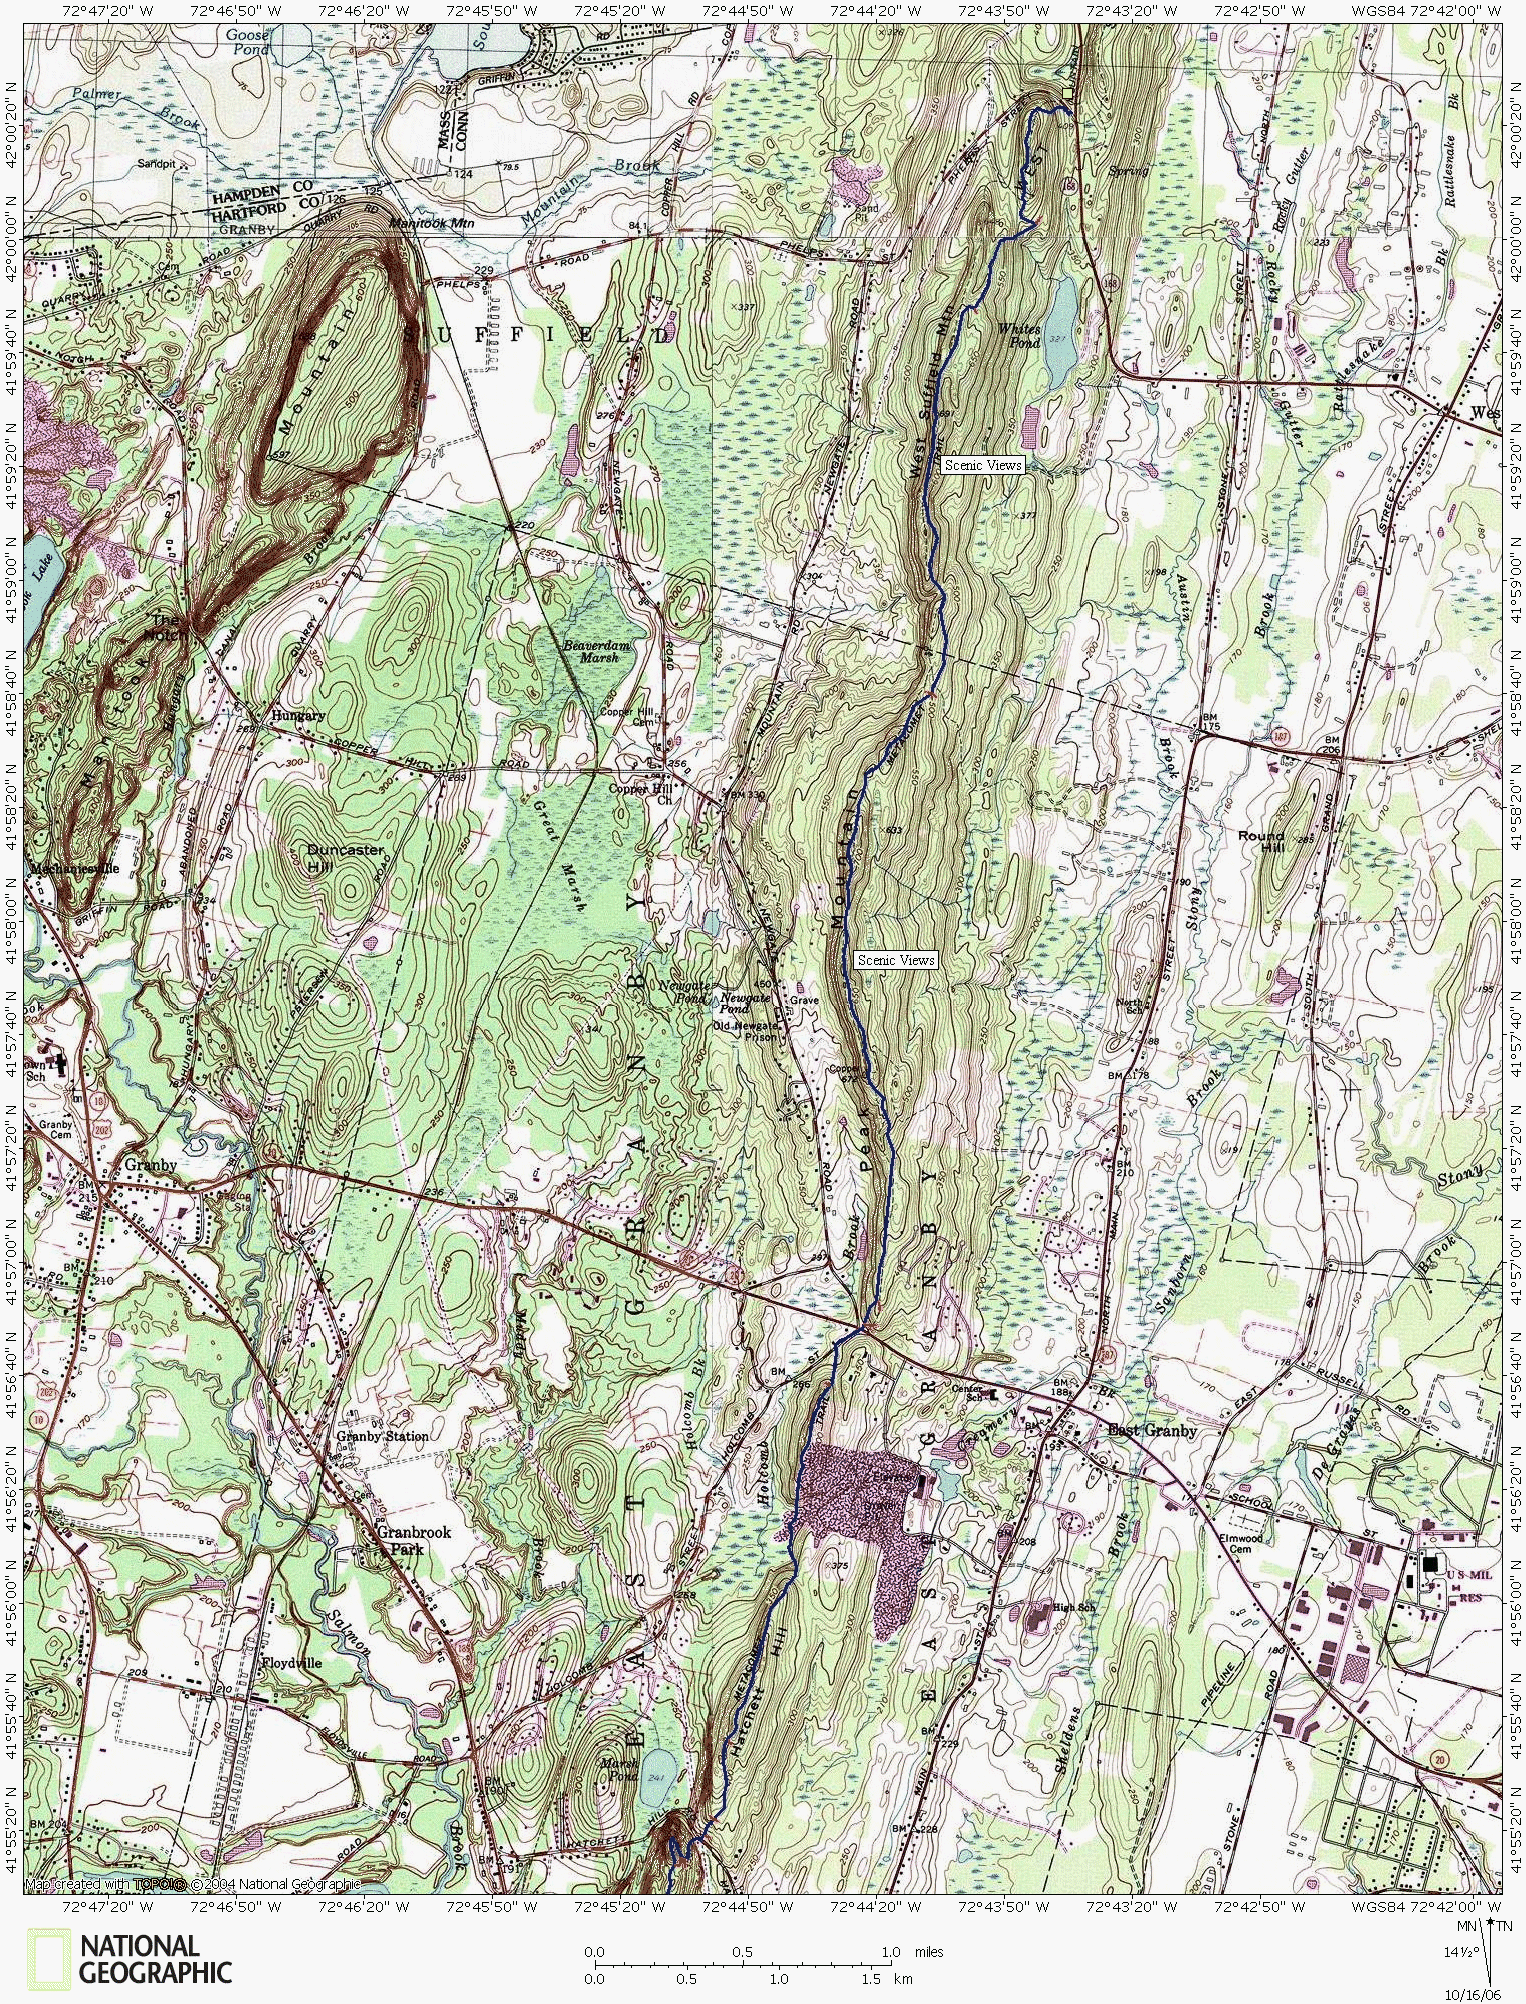 Connecticut, Metacomet, Map, Hiking, Backpacking, Trail, West Suffield